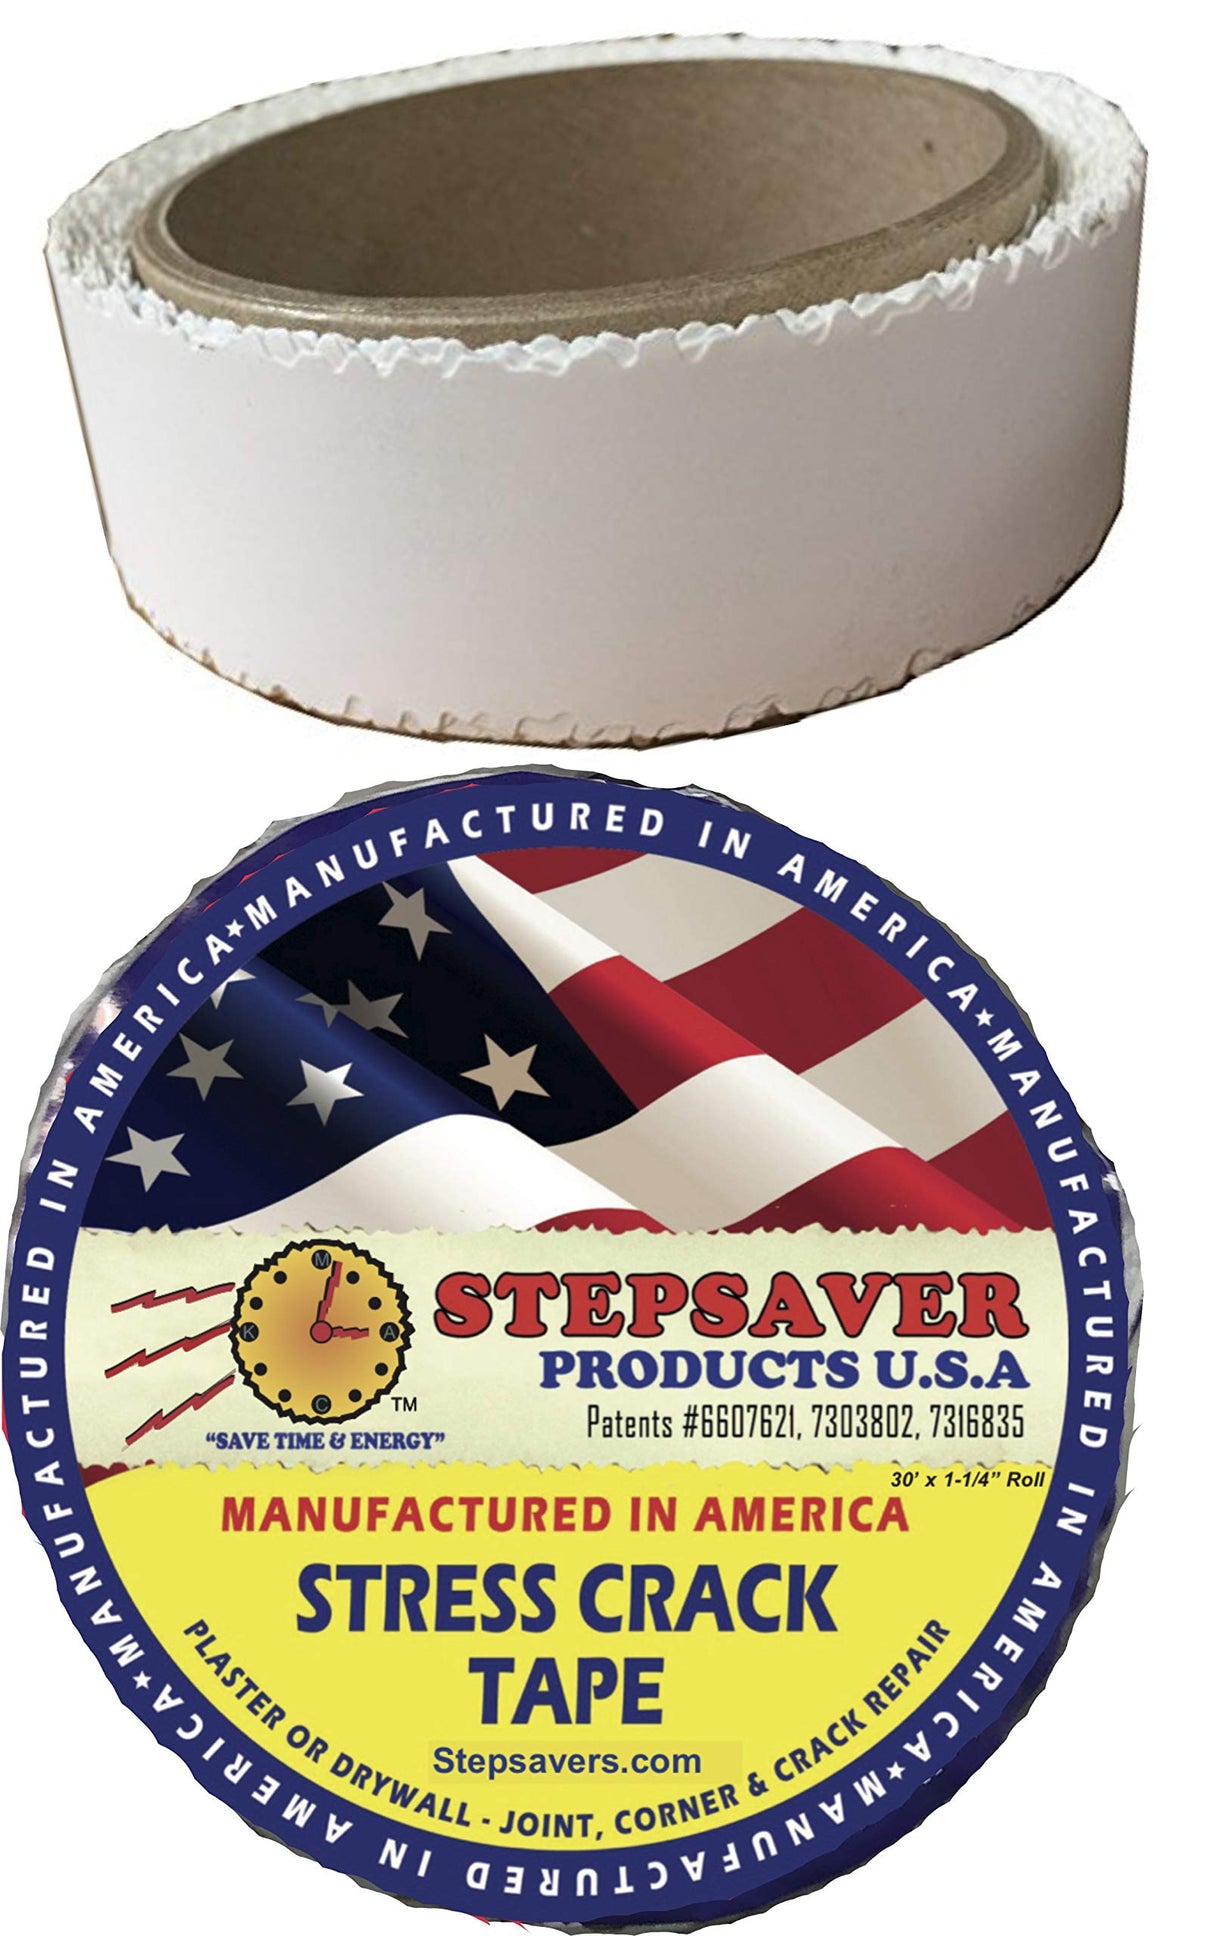 Stepsaver Products Self Adhesive Stress Crack Tape (1.25'' x 30' Smooth Roll) Item 7030